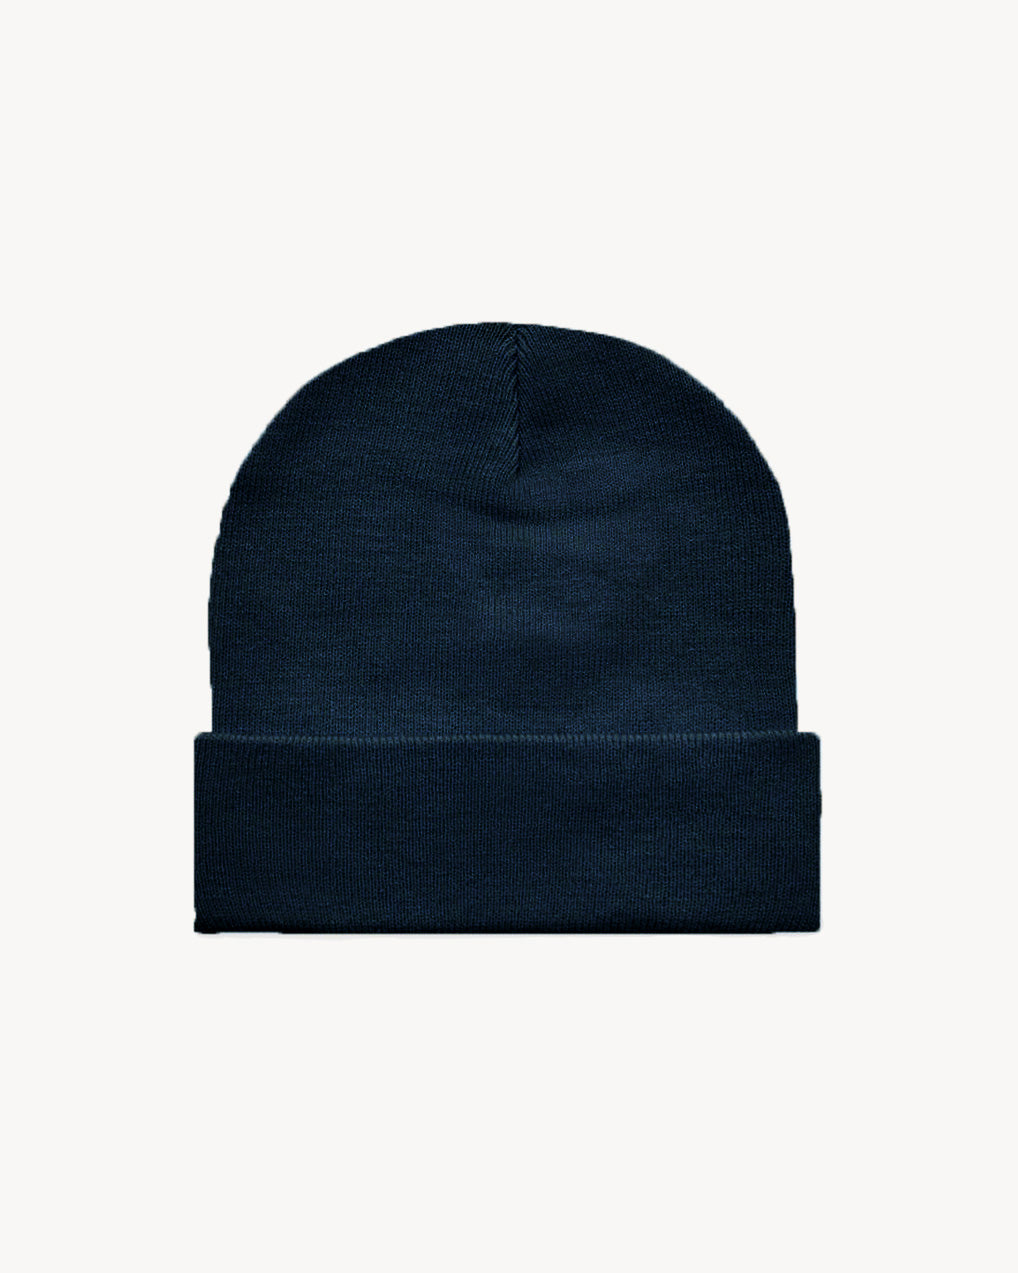 NAVY BLUE HAT | CUSTOM EMBROIDERY